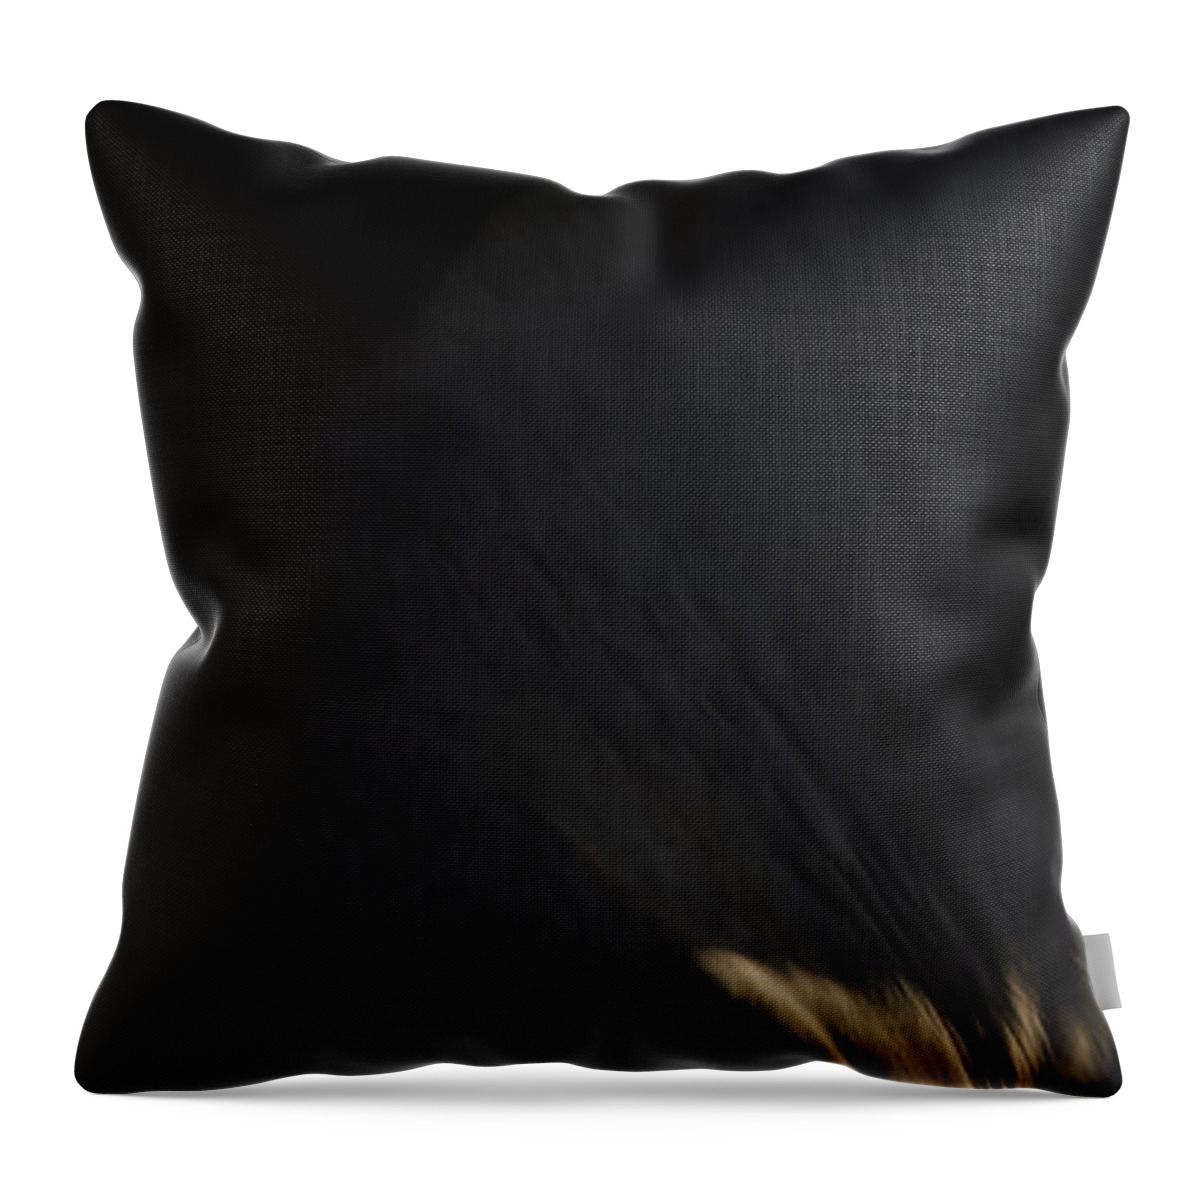 Andalusia Throw Pillow featuring the photograph Americano 18 by Catherine Sobredo